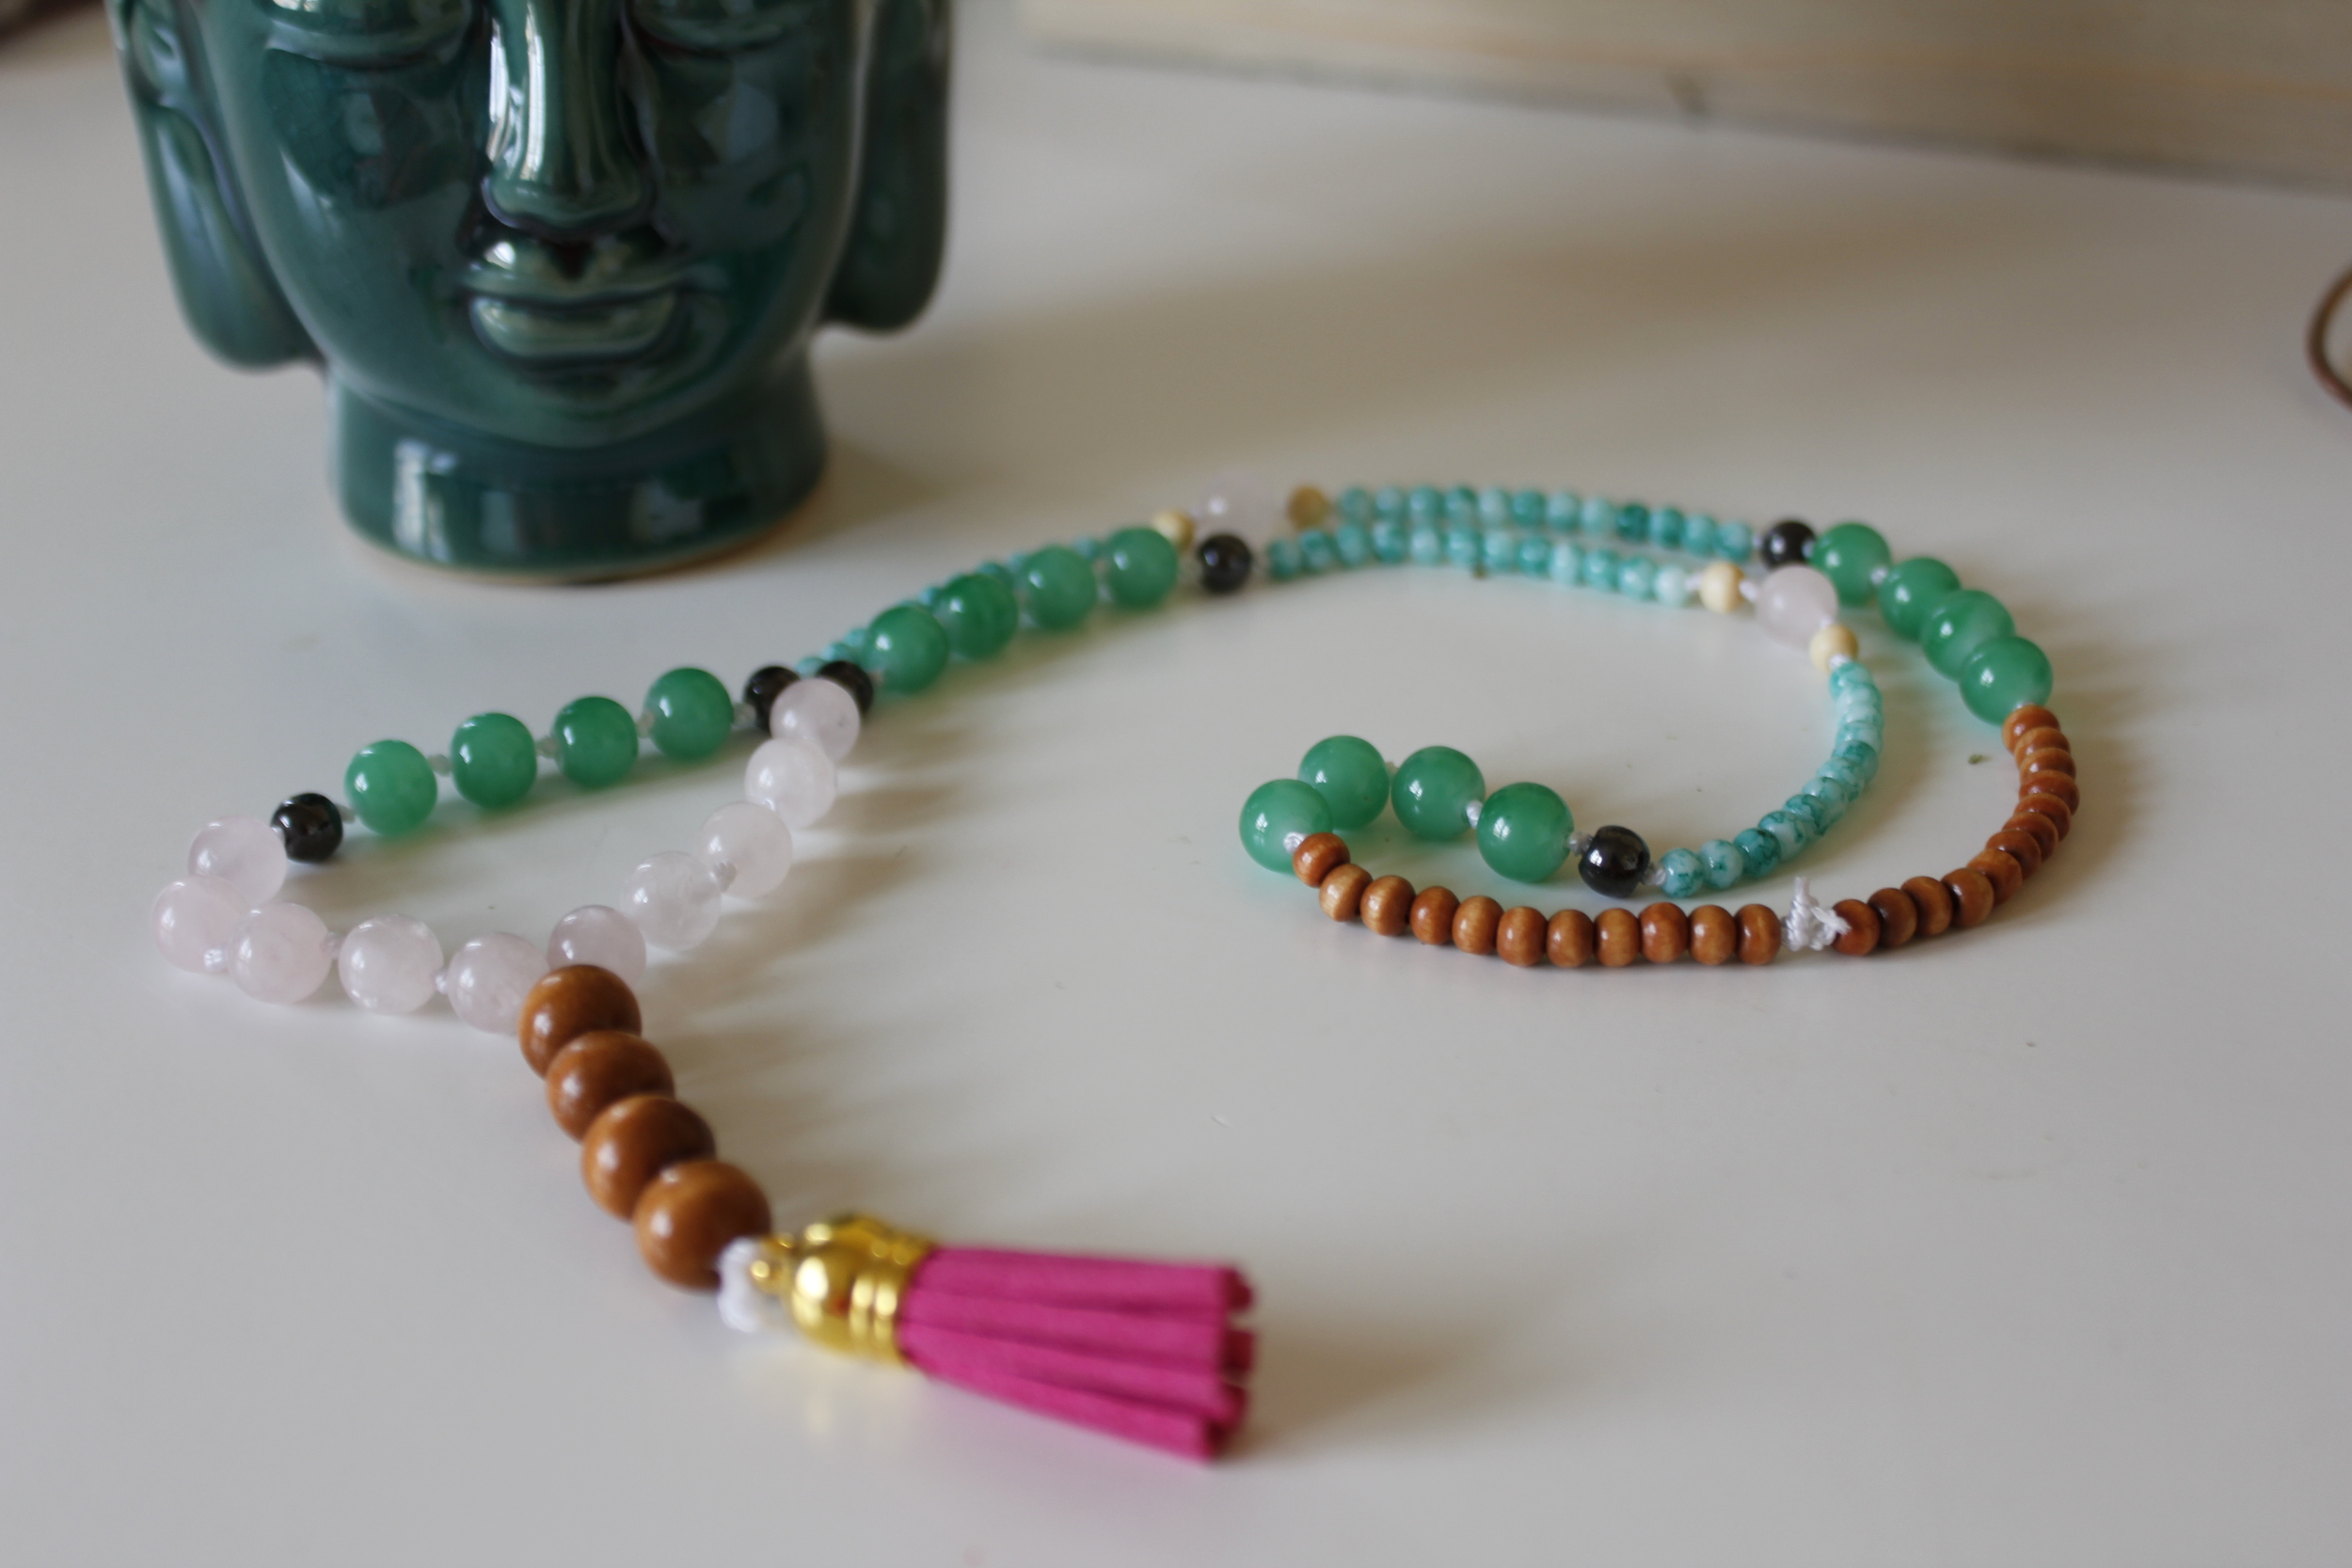 How to Make DIY Mala Bead Necklace - Likely By Sea